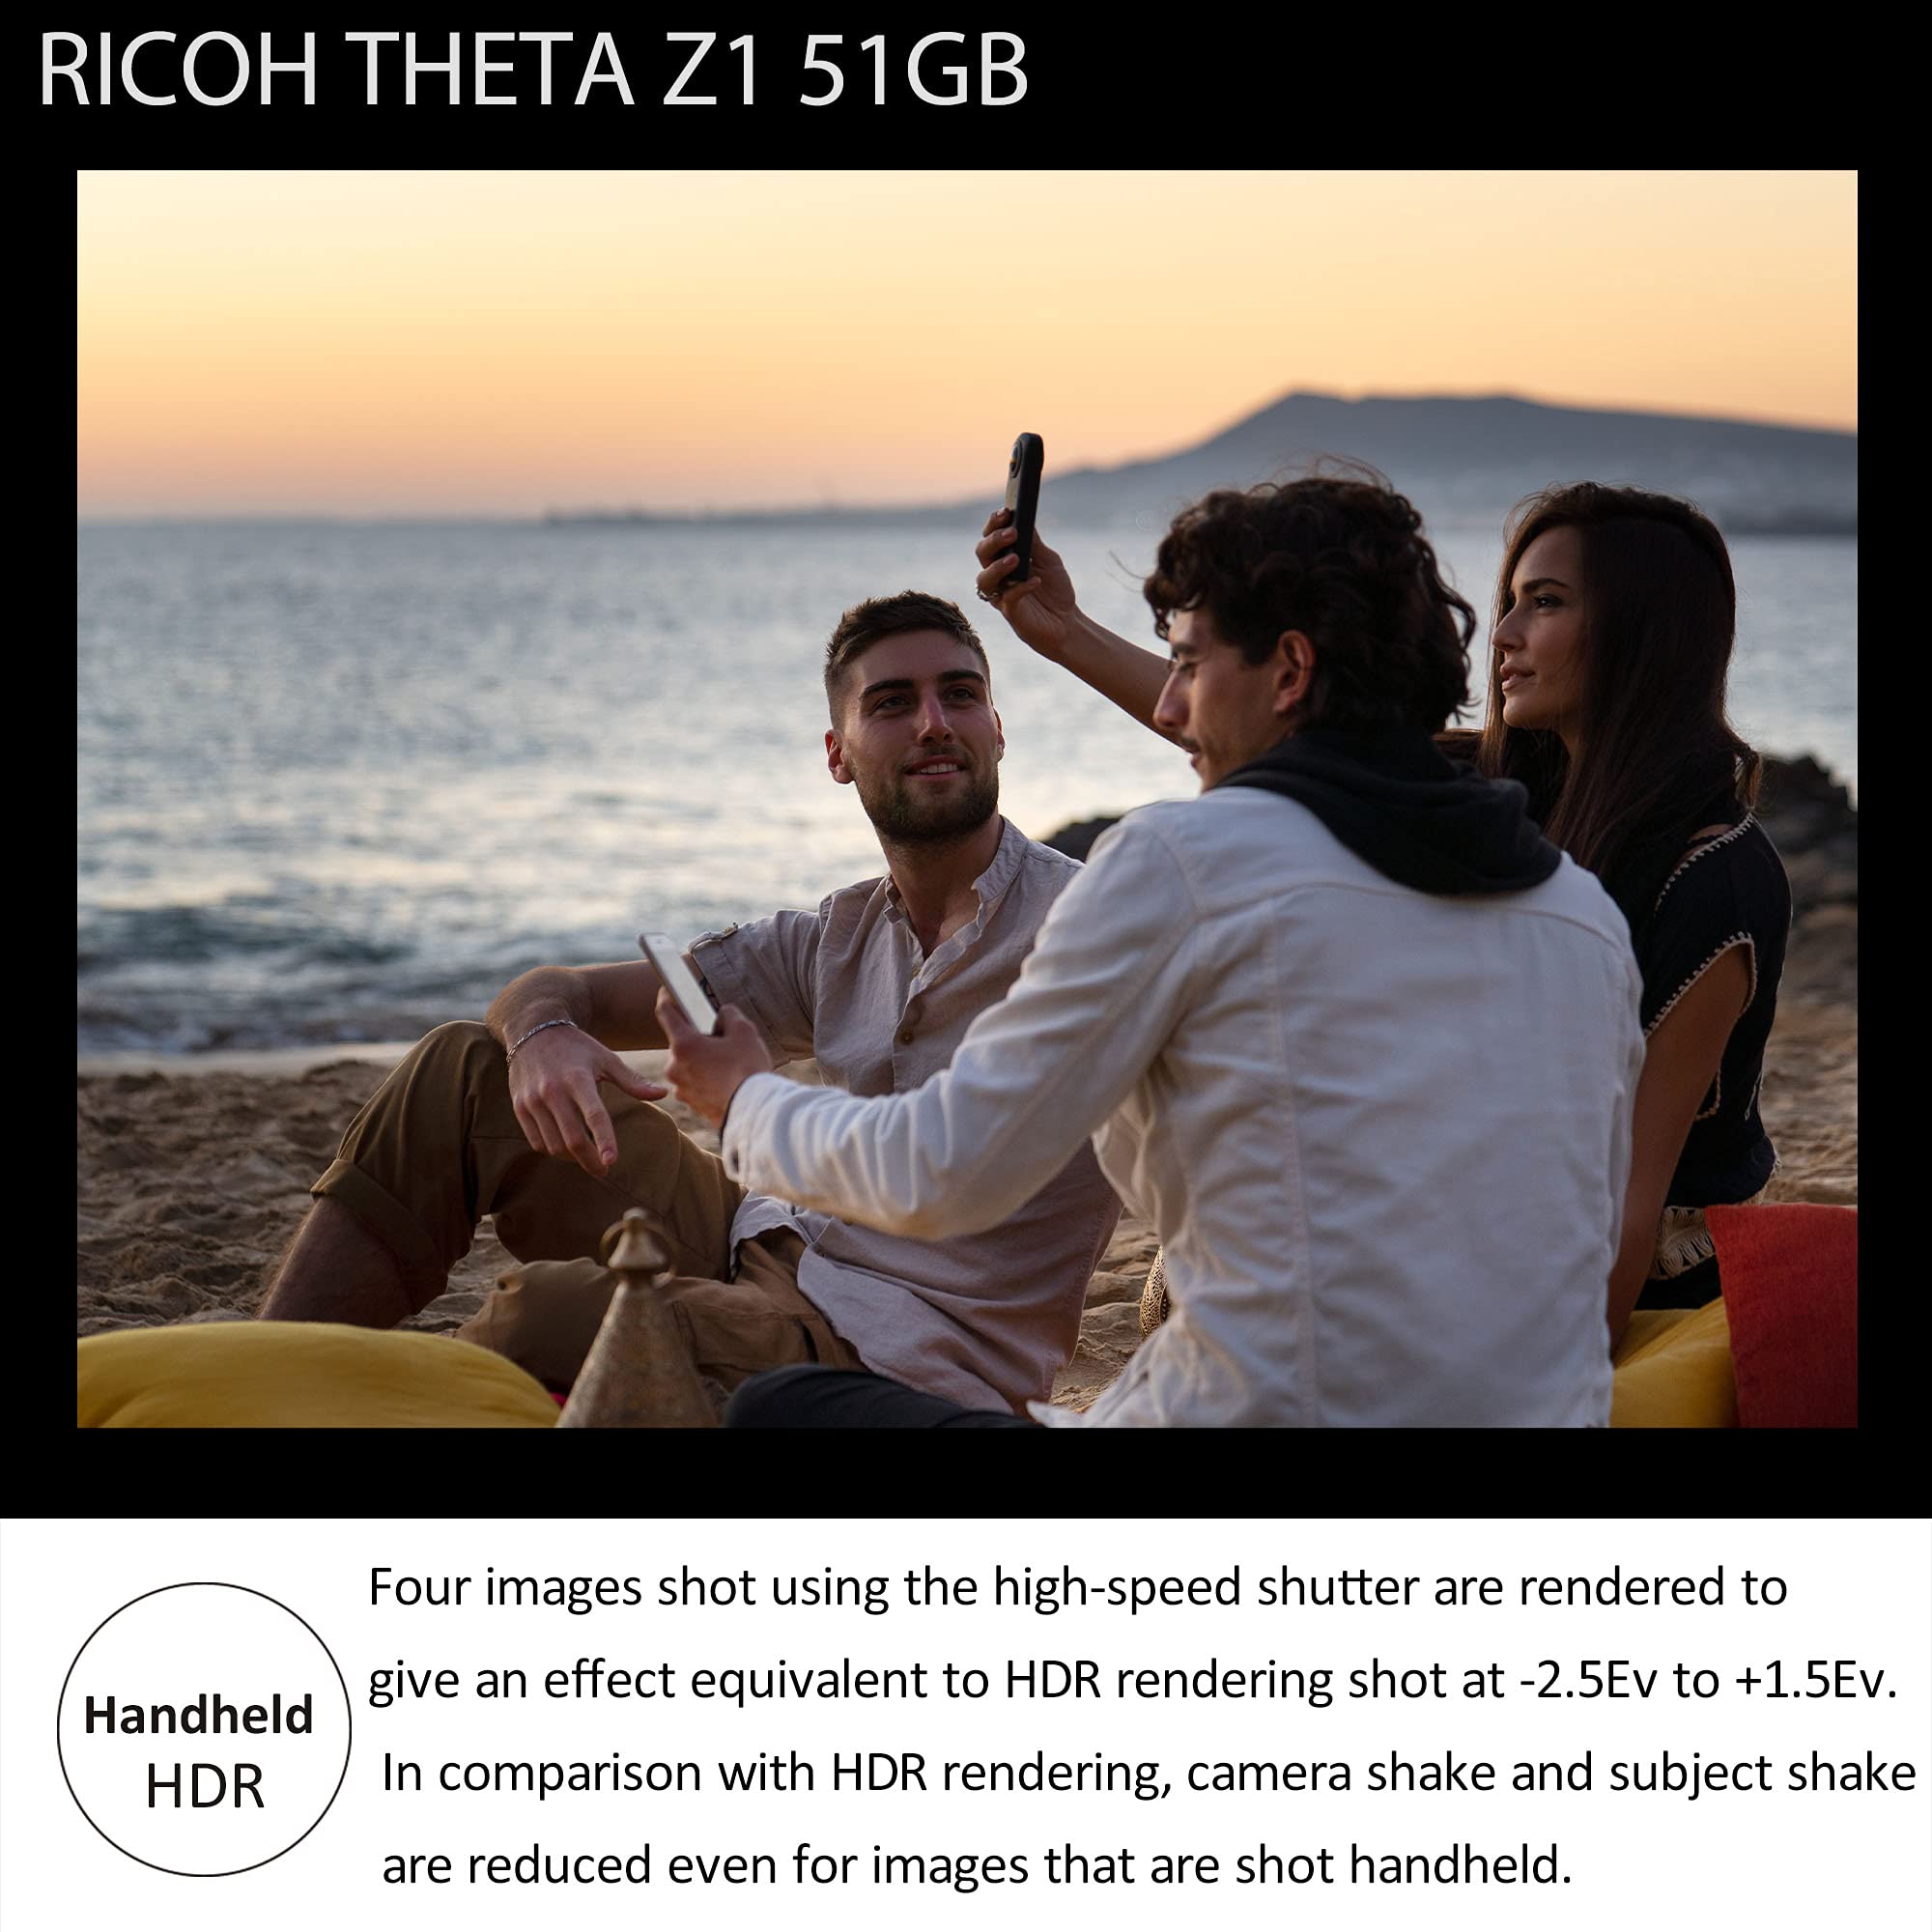 RICOH THETA Z1 51GB Black 360° camera, two 1.0-inch back-illuminated CMOS sensors, increased 51GB internal memory, 23MP images, 4K video with image stabilization, HDR, High-speed wireless transfer